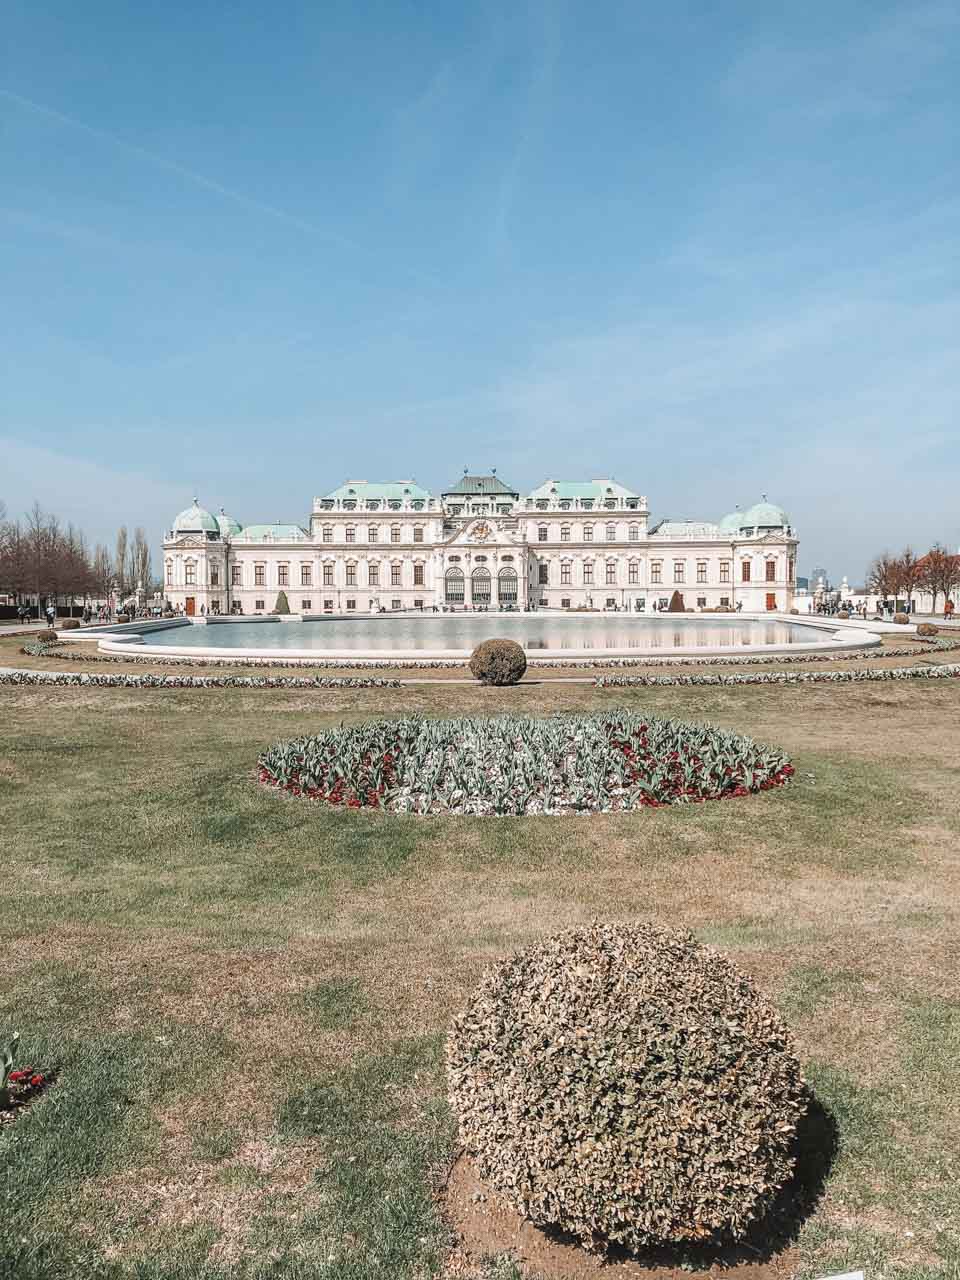 The outside of the Belvedere Palace in Vienna, Austria